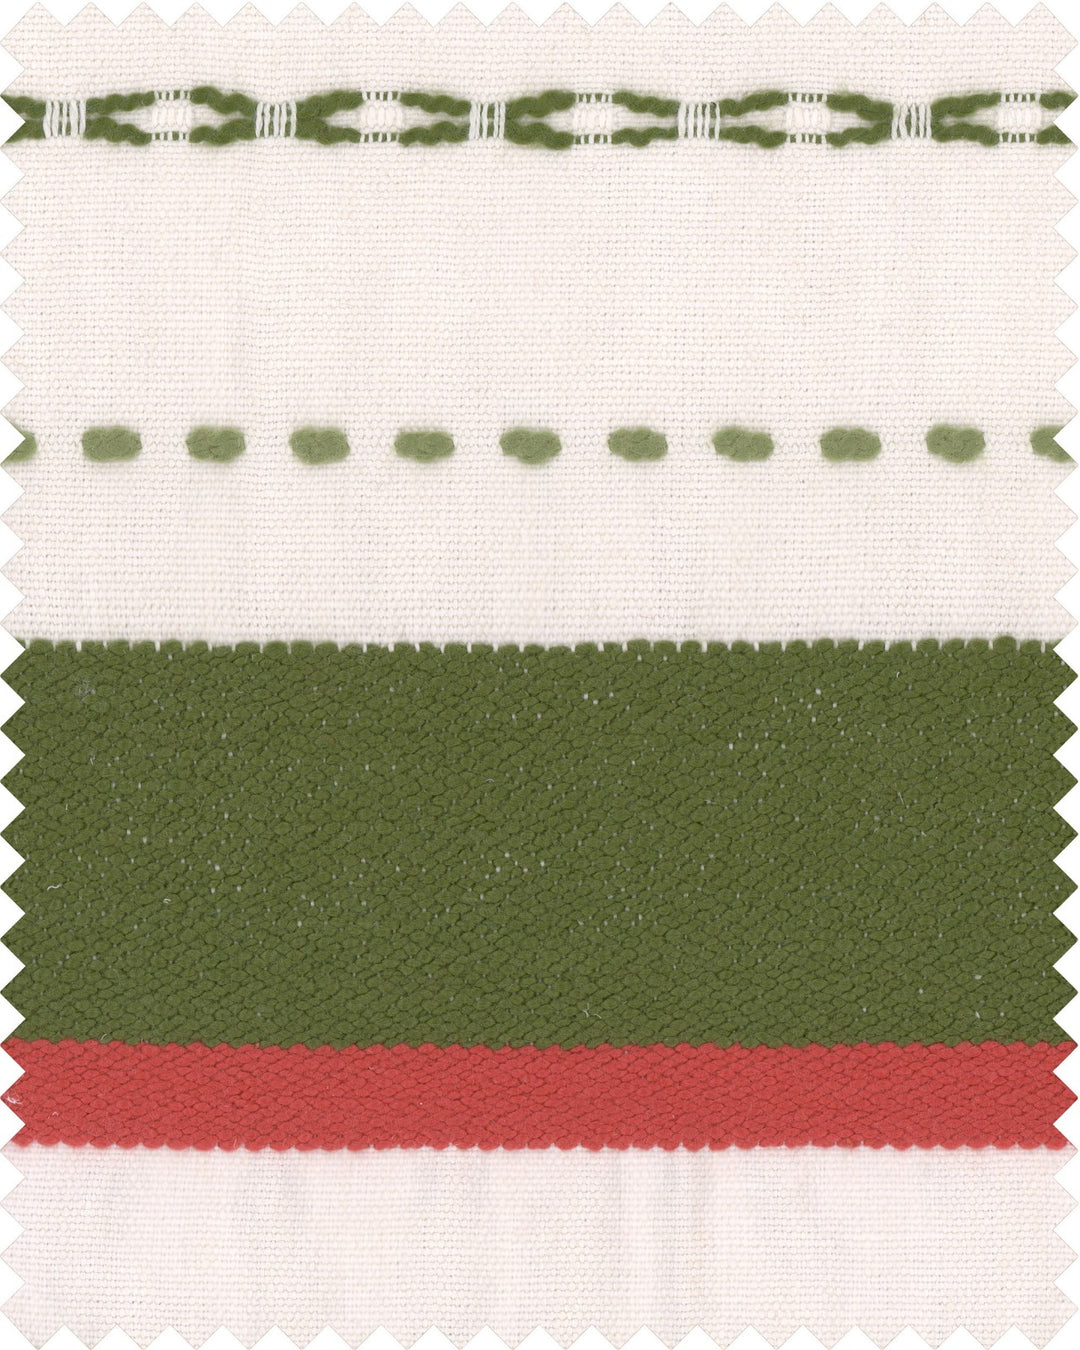 Mind-the-gap-Tyrol-collection-Hanwernlich-woven-fabric-white-red-green-stripe-cotton-linen-mix-alpine-traditional-folklore-pattern-apres-ski-cabin-lodge-textilen